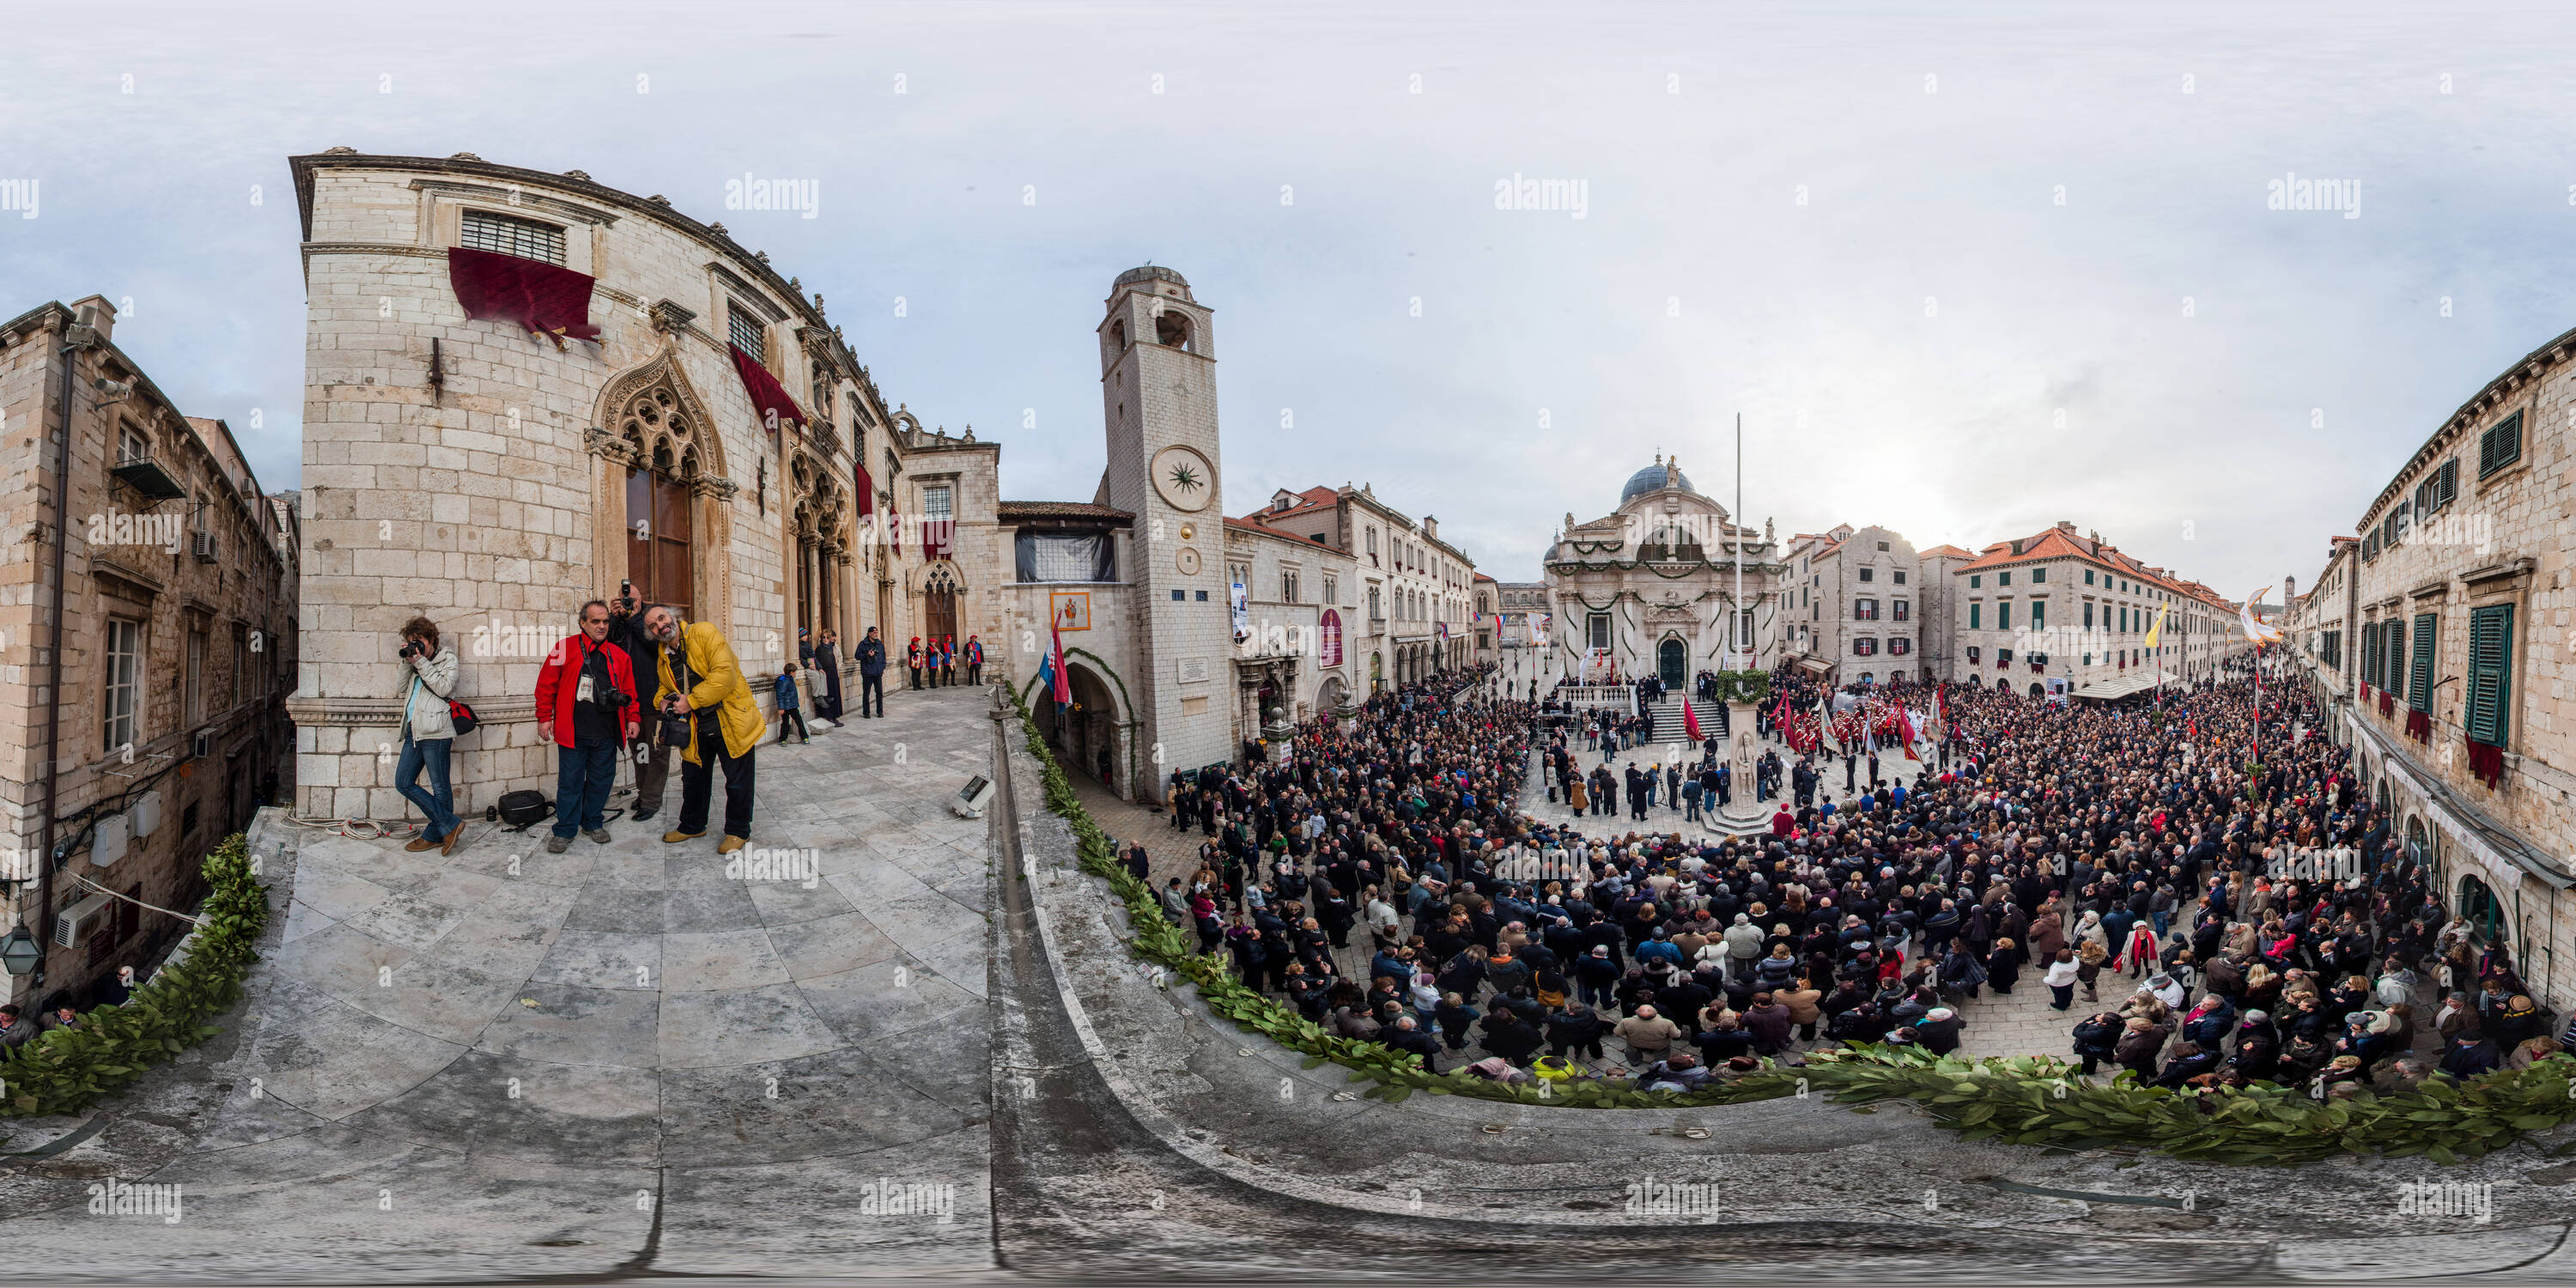 360 degree panoramic view of Candlemas, Christian festival beginning on February 2nd in Dubrovnik